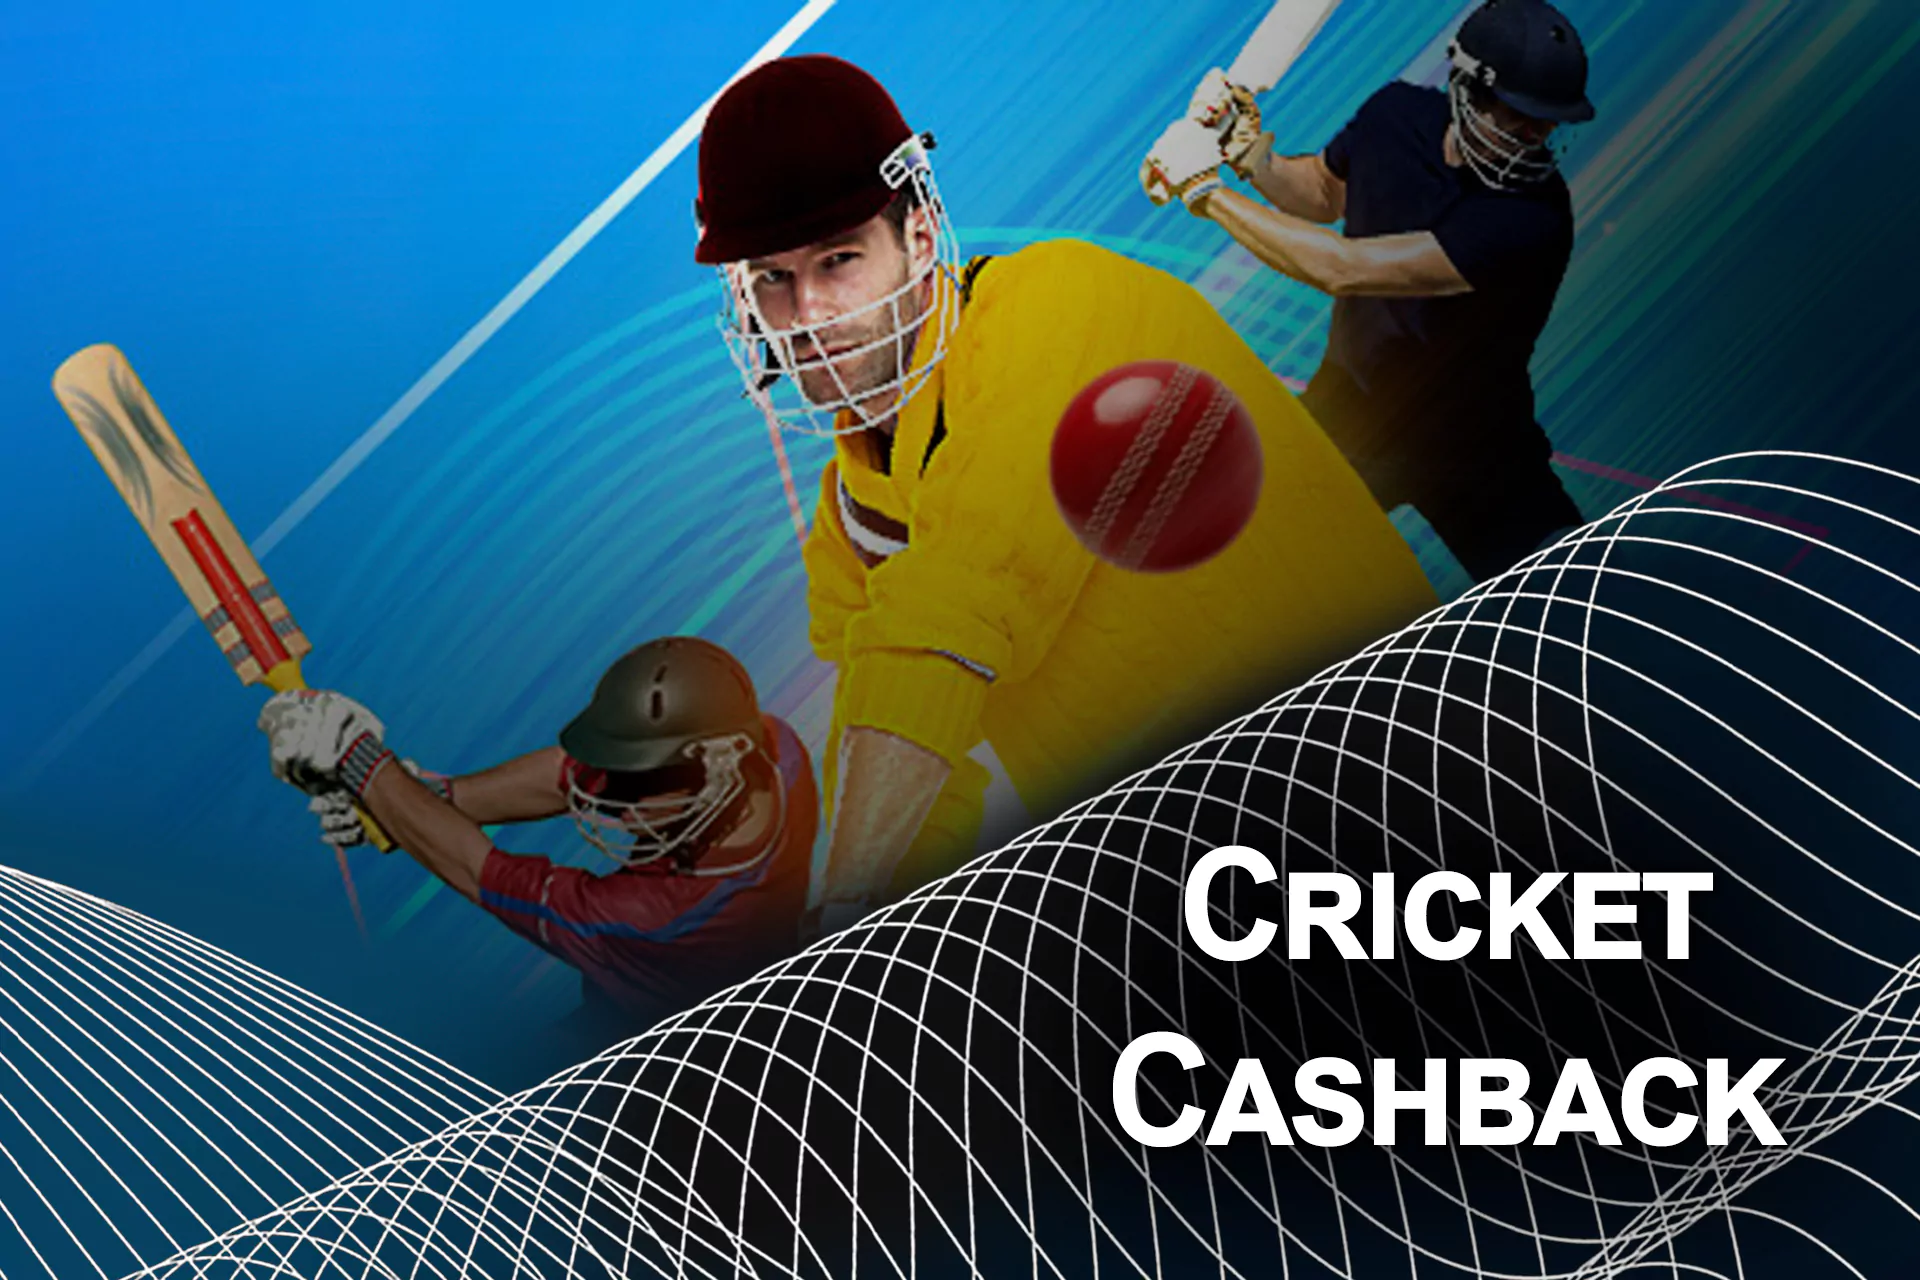 If you prefer placing bets on cricket events, you can count the receiving a cashback according to the rules of the Dafabet loyalty program.